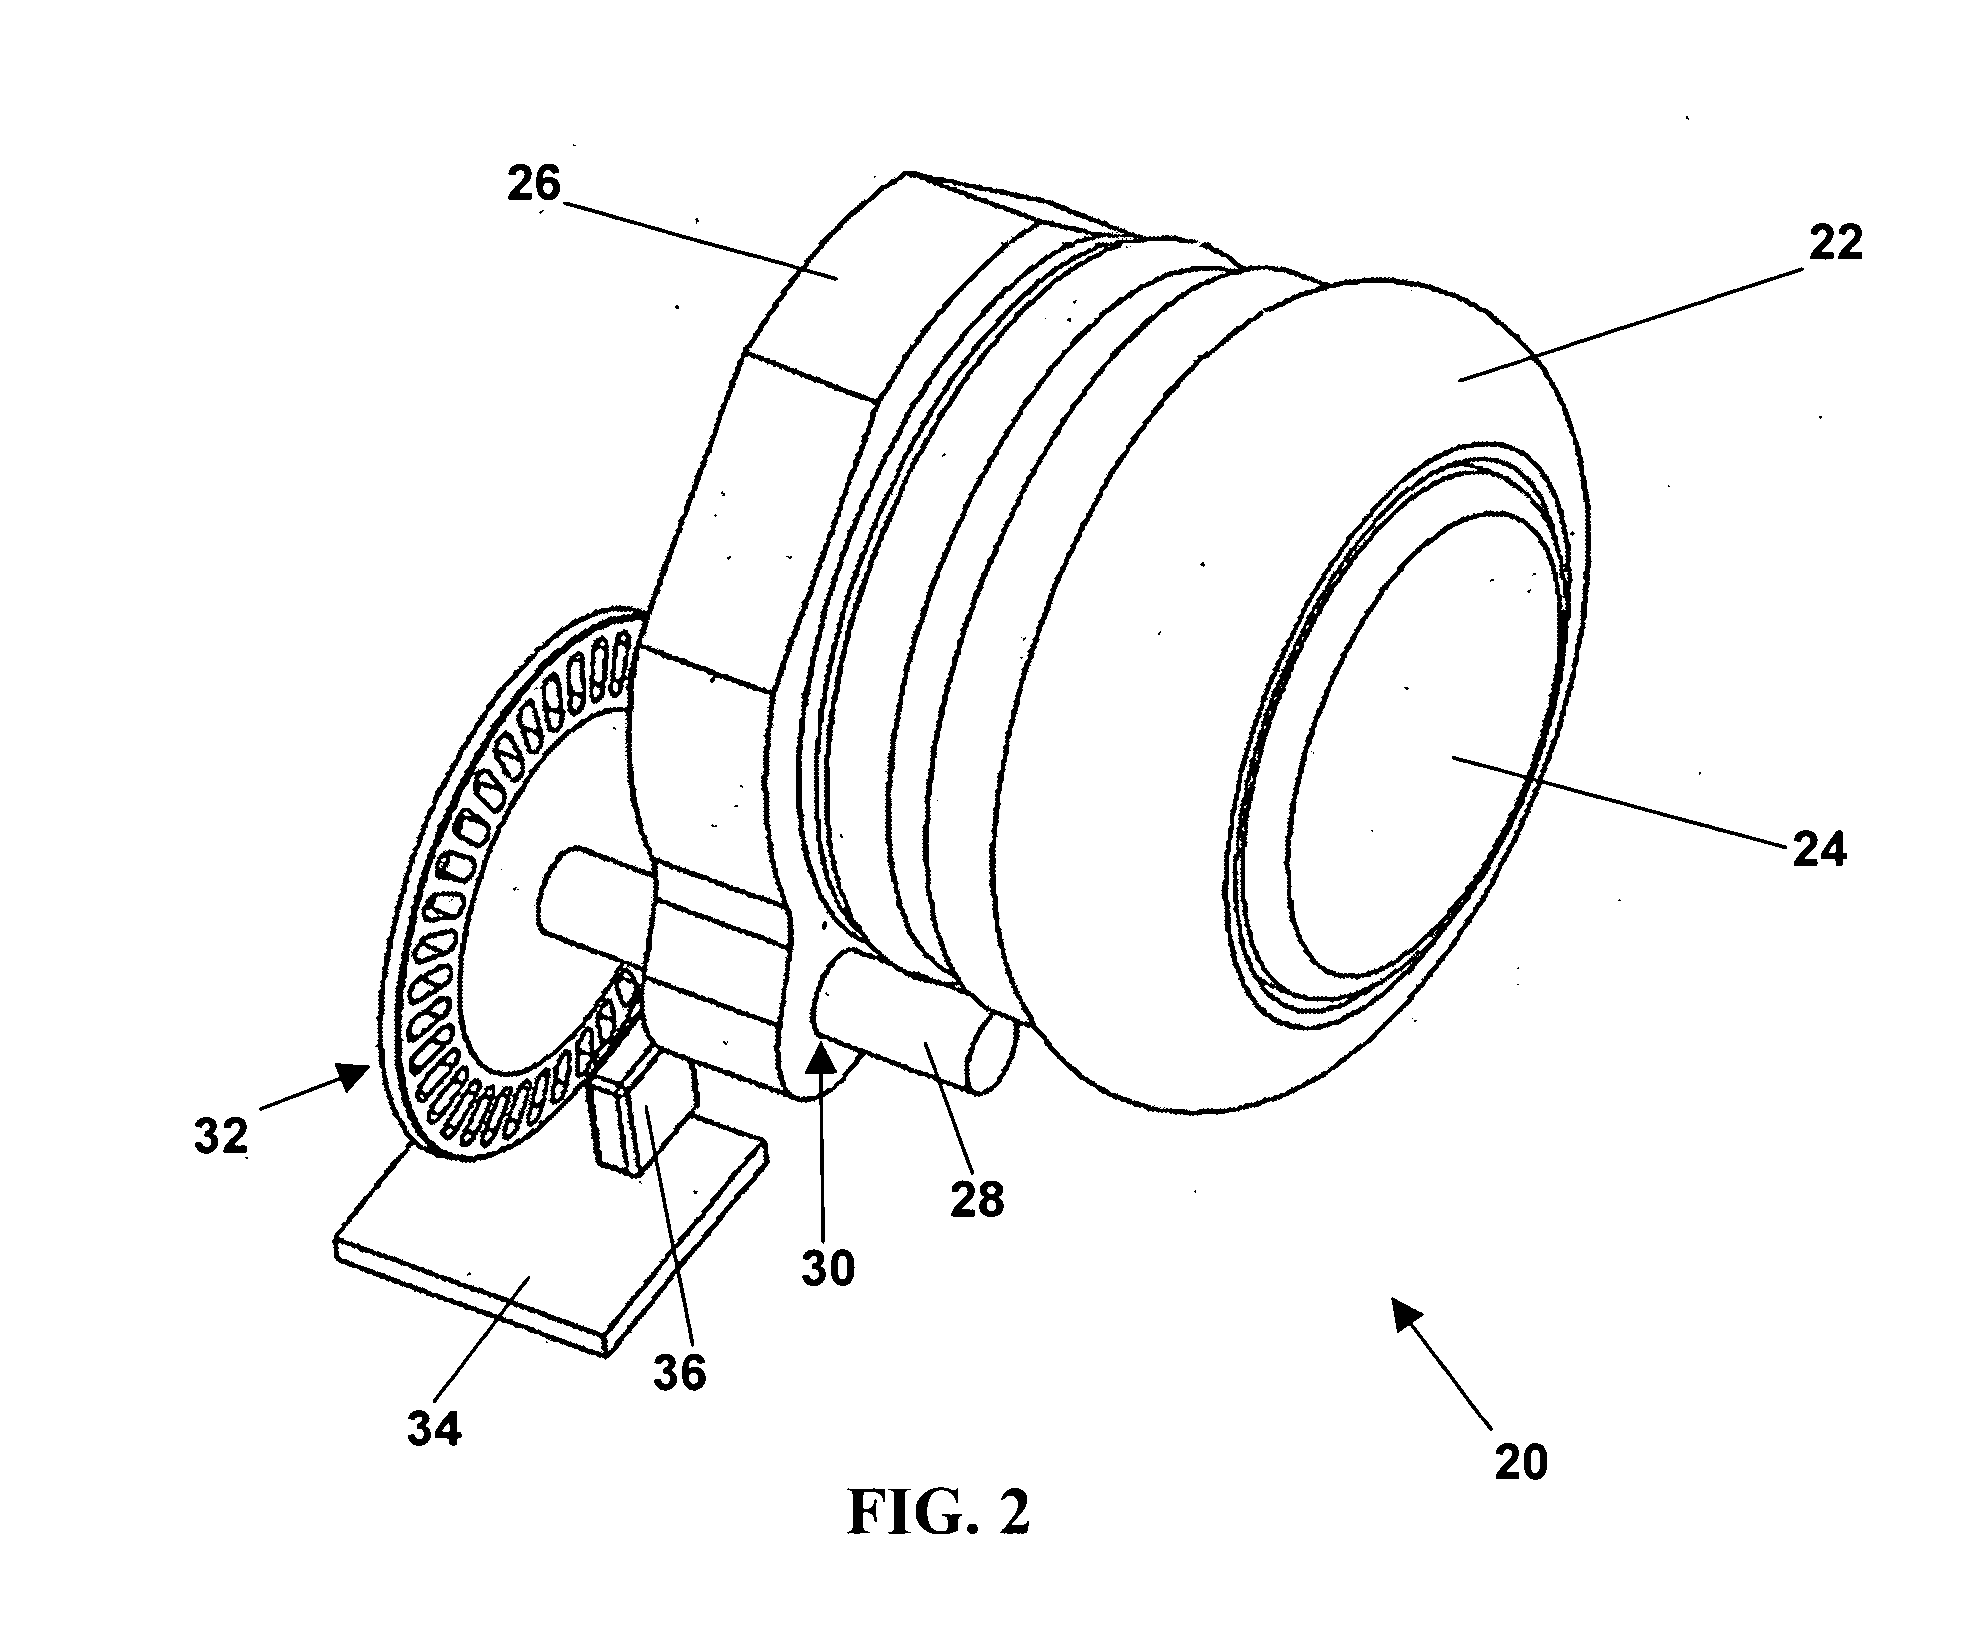 Input device including a scroll wheel assembly for manipulating an image in multiple directions